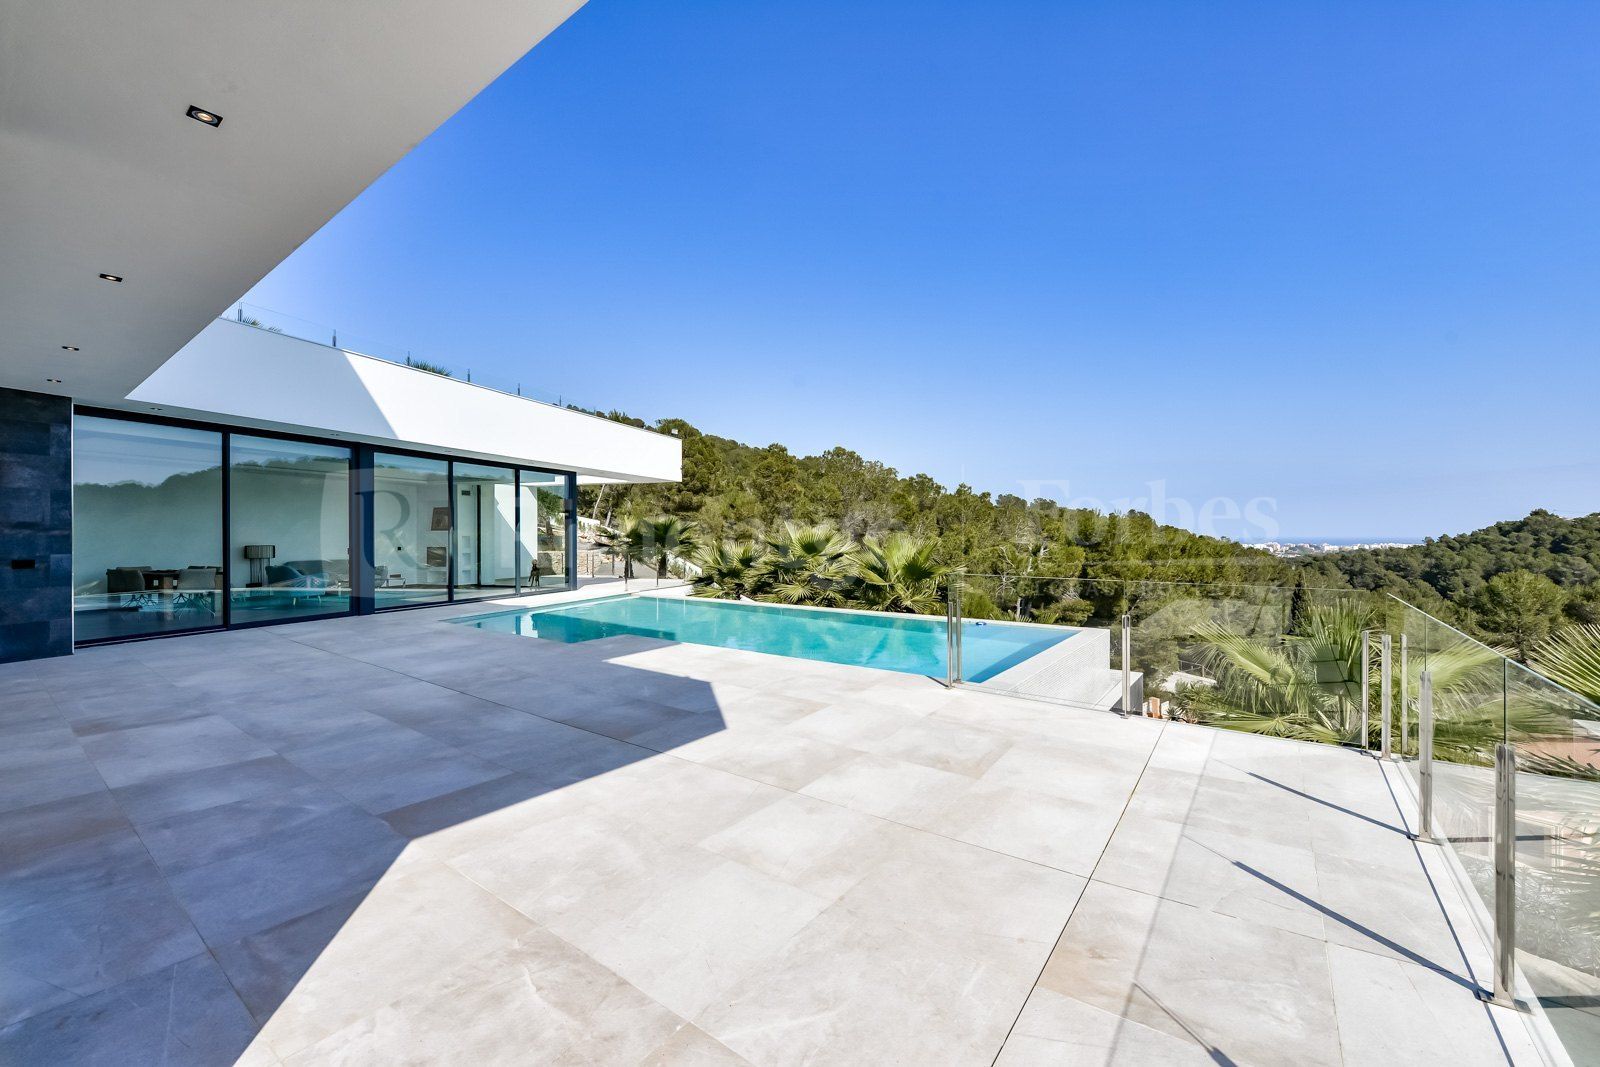 Modern design villa with views of the valley in the Costa Blanca.